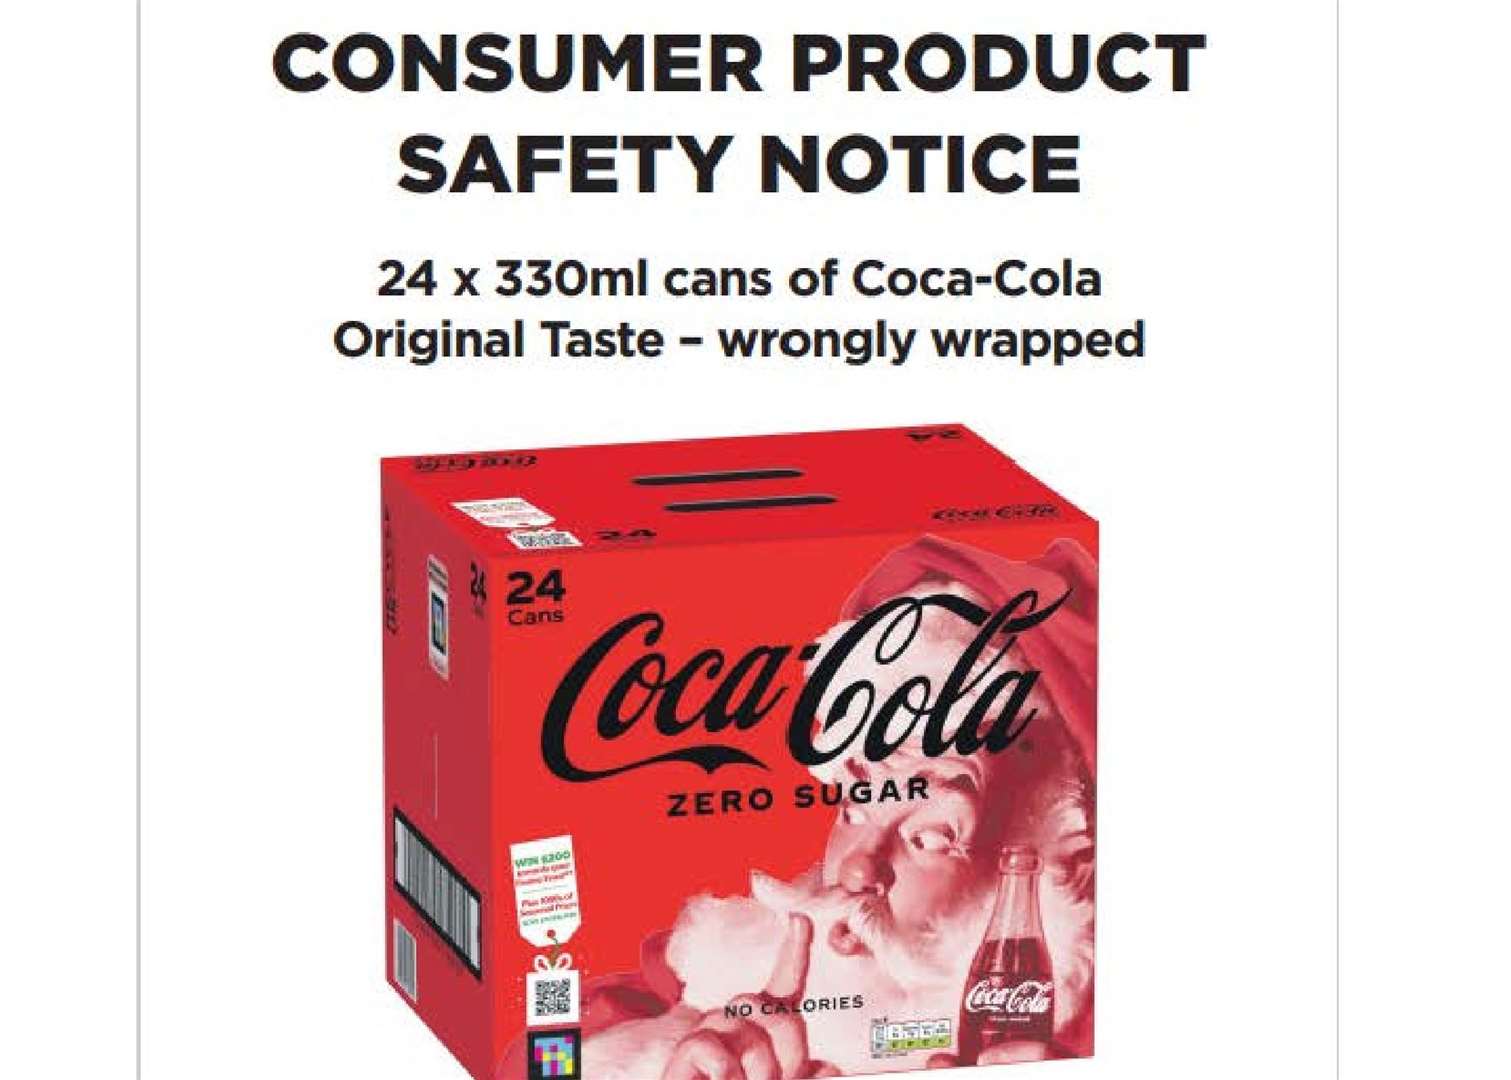 Recall notices are being displayed in shops. Image: FSA.